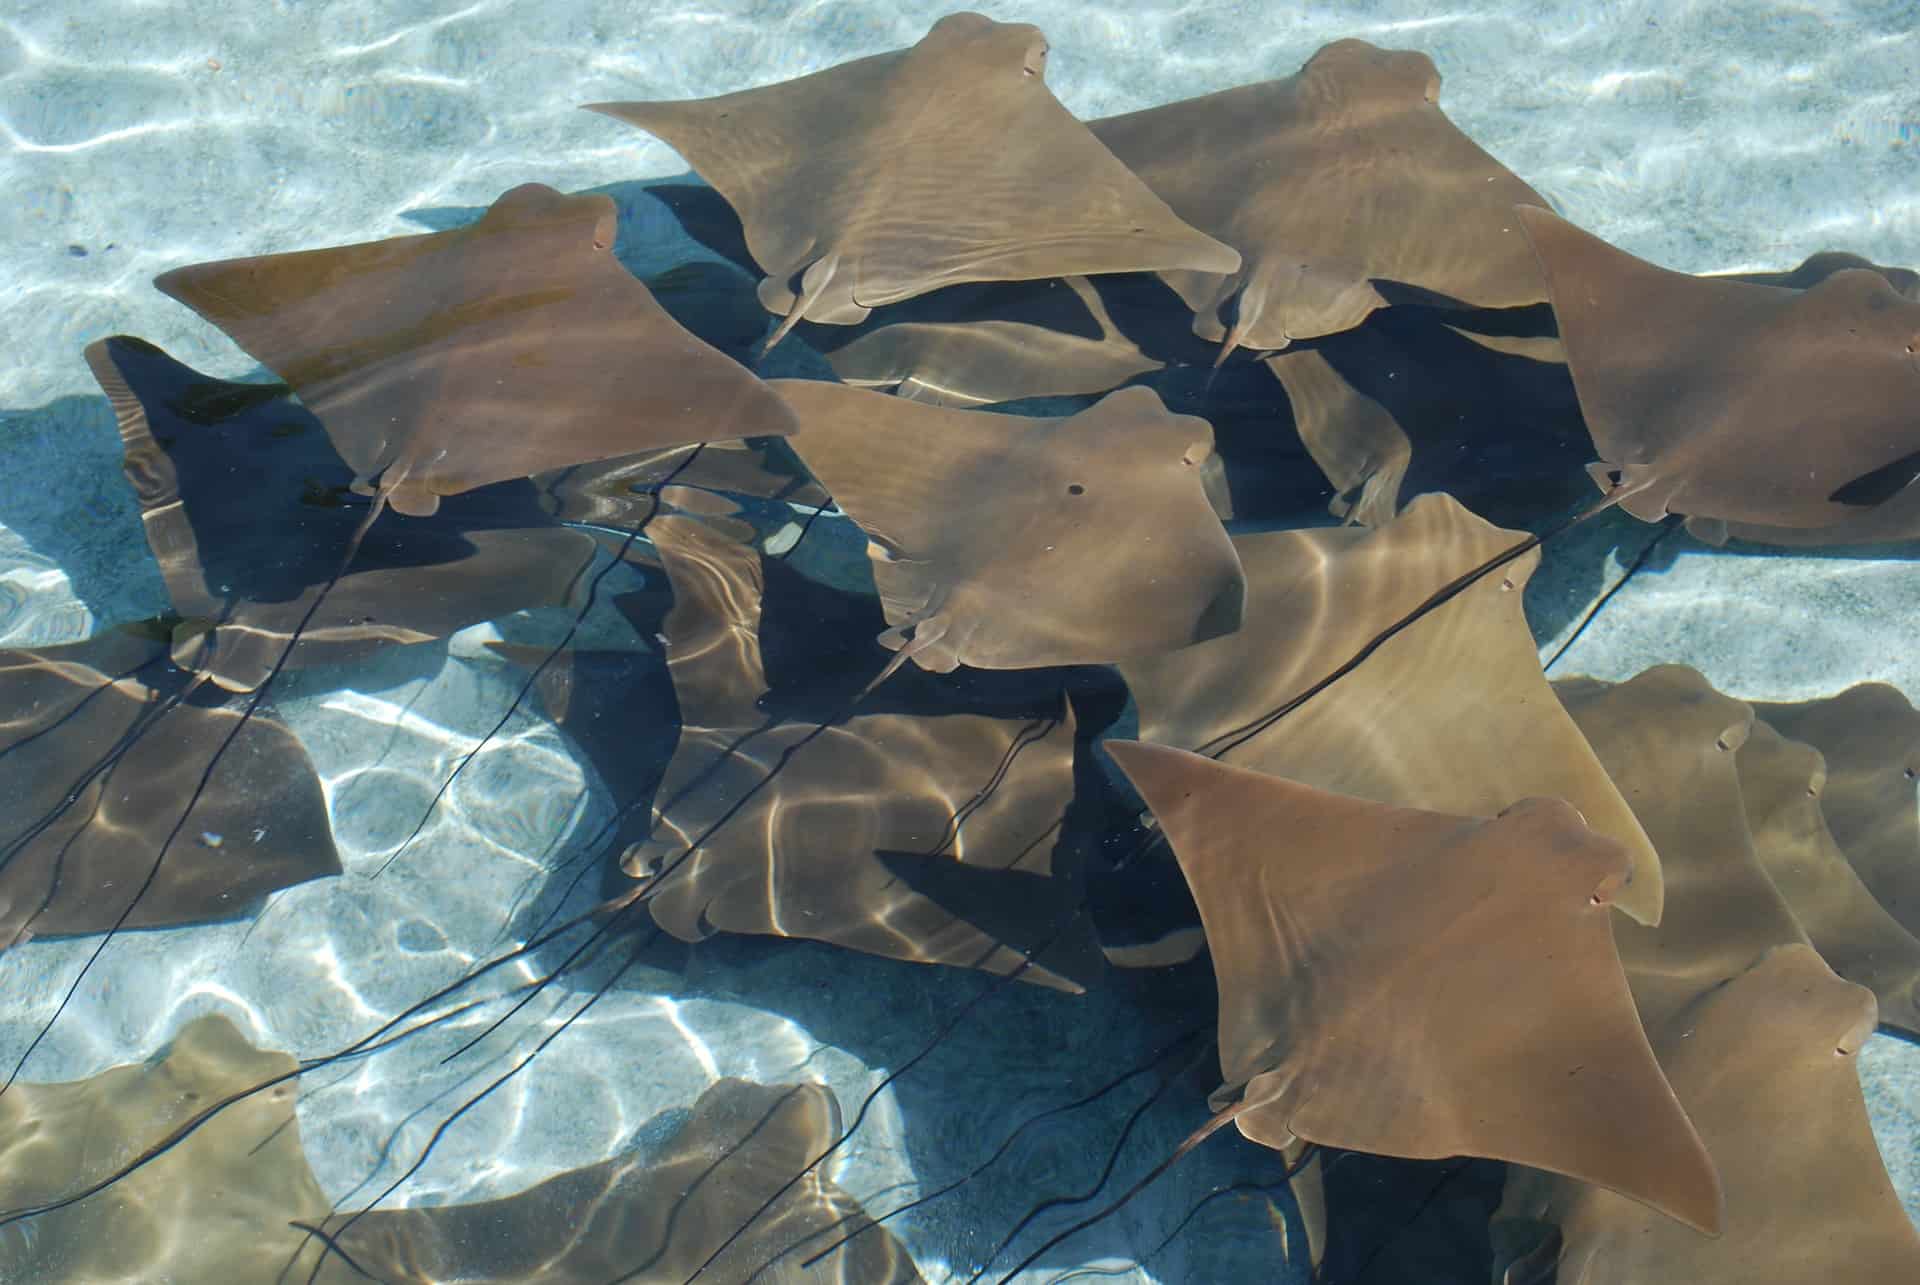 Top 15 Stingray Facts Types, Diet, Migration and More